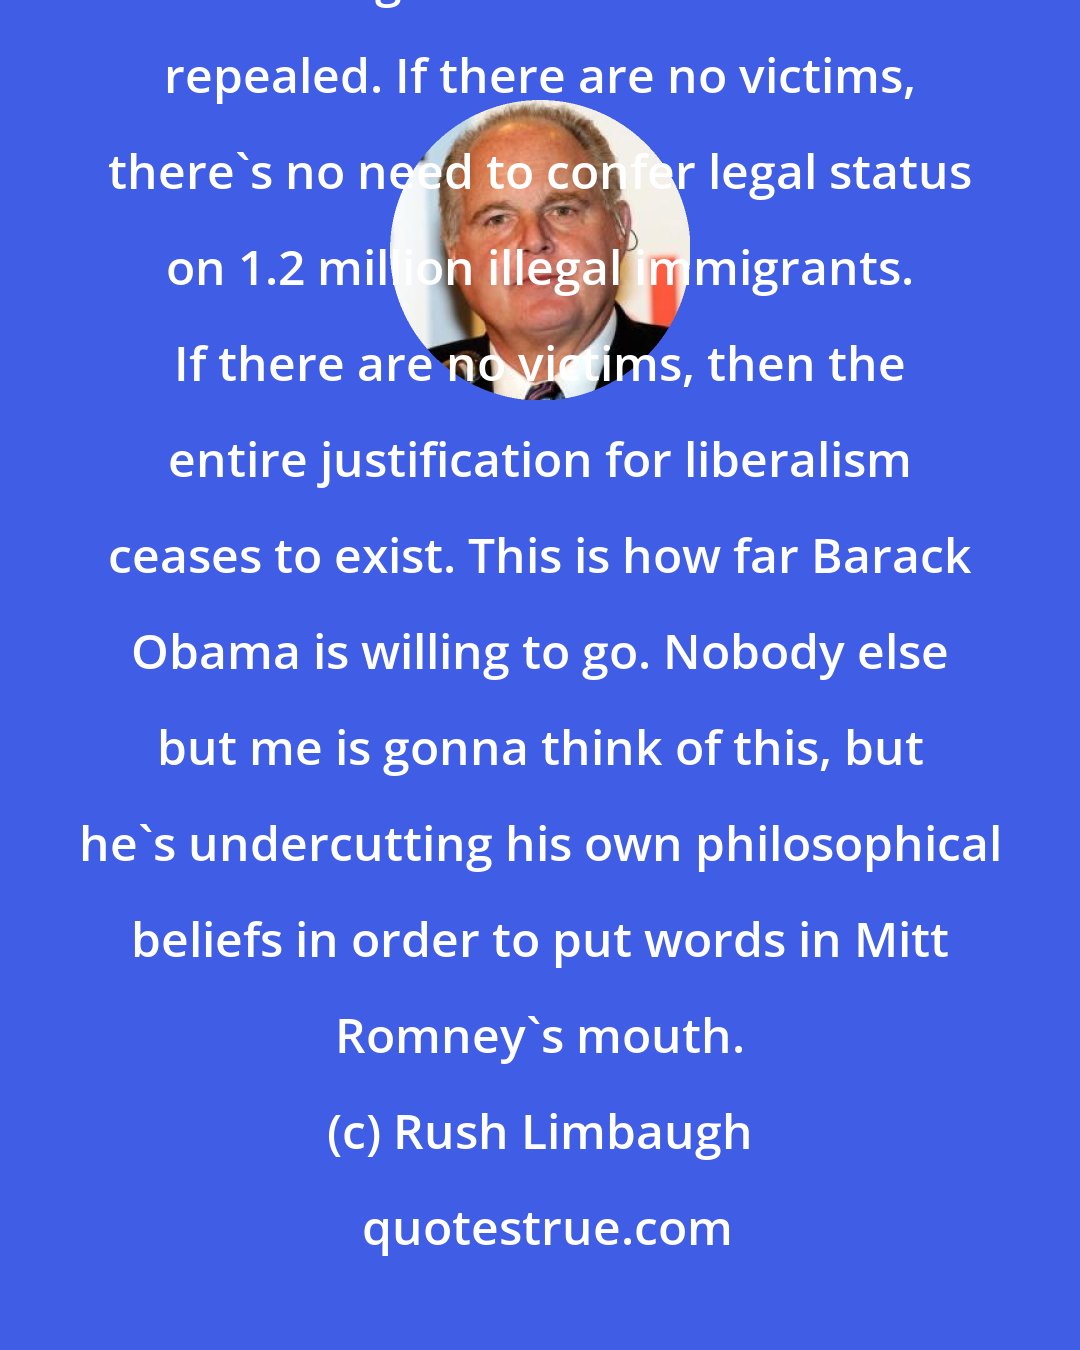 Rush Limbaugh: If there are no victims in the U.S, then there no need to redistribute wealth. Right? So that needs to be repealed. If there are no victims, there's no need to confer legal status on 1.2 million illegal immigrants. If there are no victims, then the entire justification for liberalism ceases to exist. This is how far Barack Obama is willing to go. Nobody else but me is gonna think of this, but he's undercutting his own philosophical beliefs in order to put words in Mitt Romney's mouth.